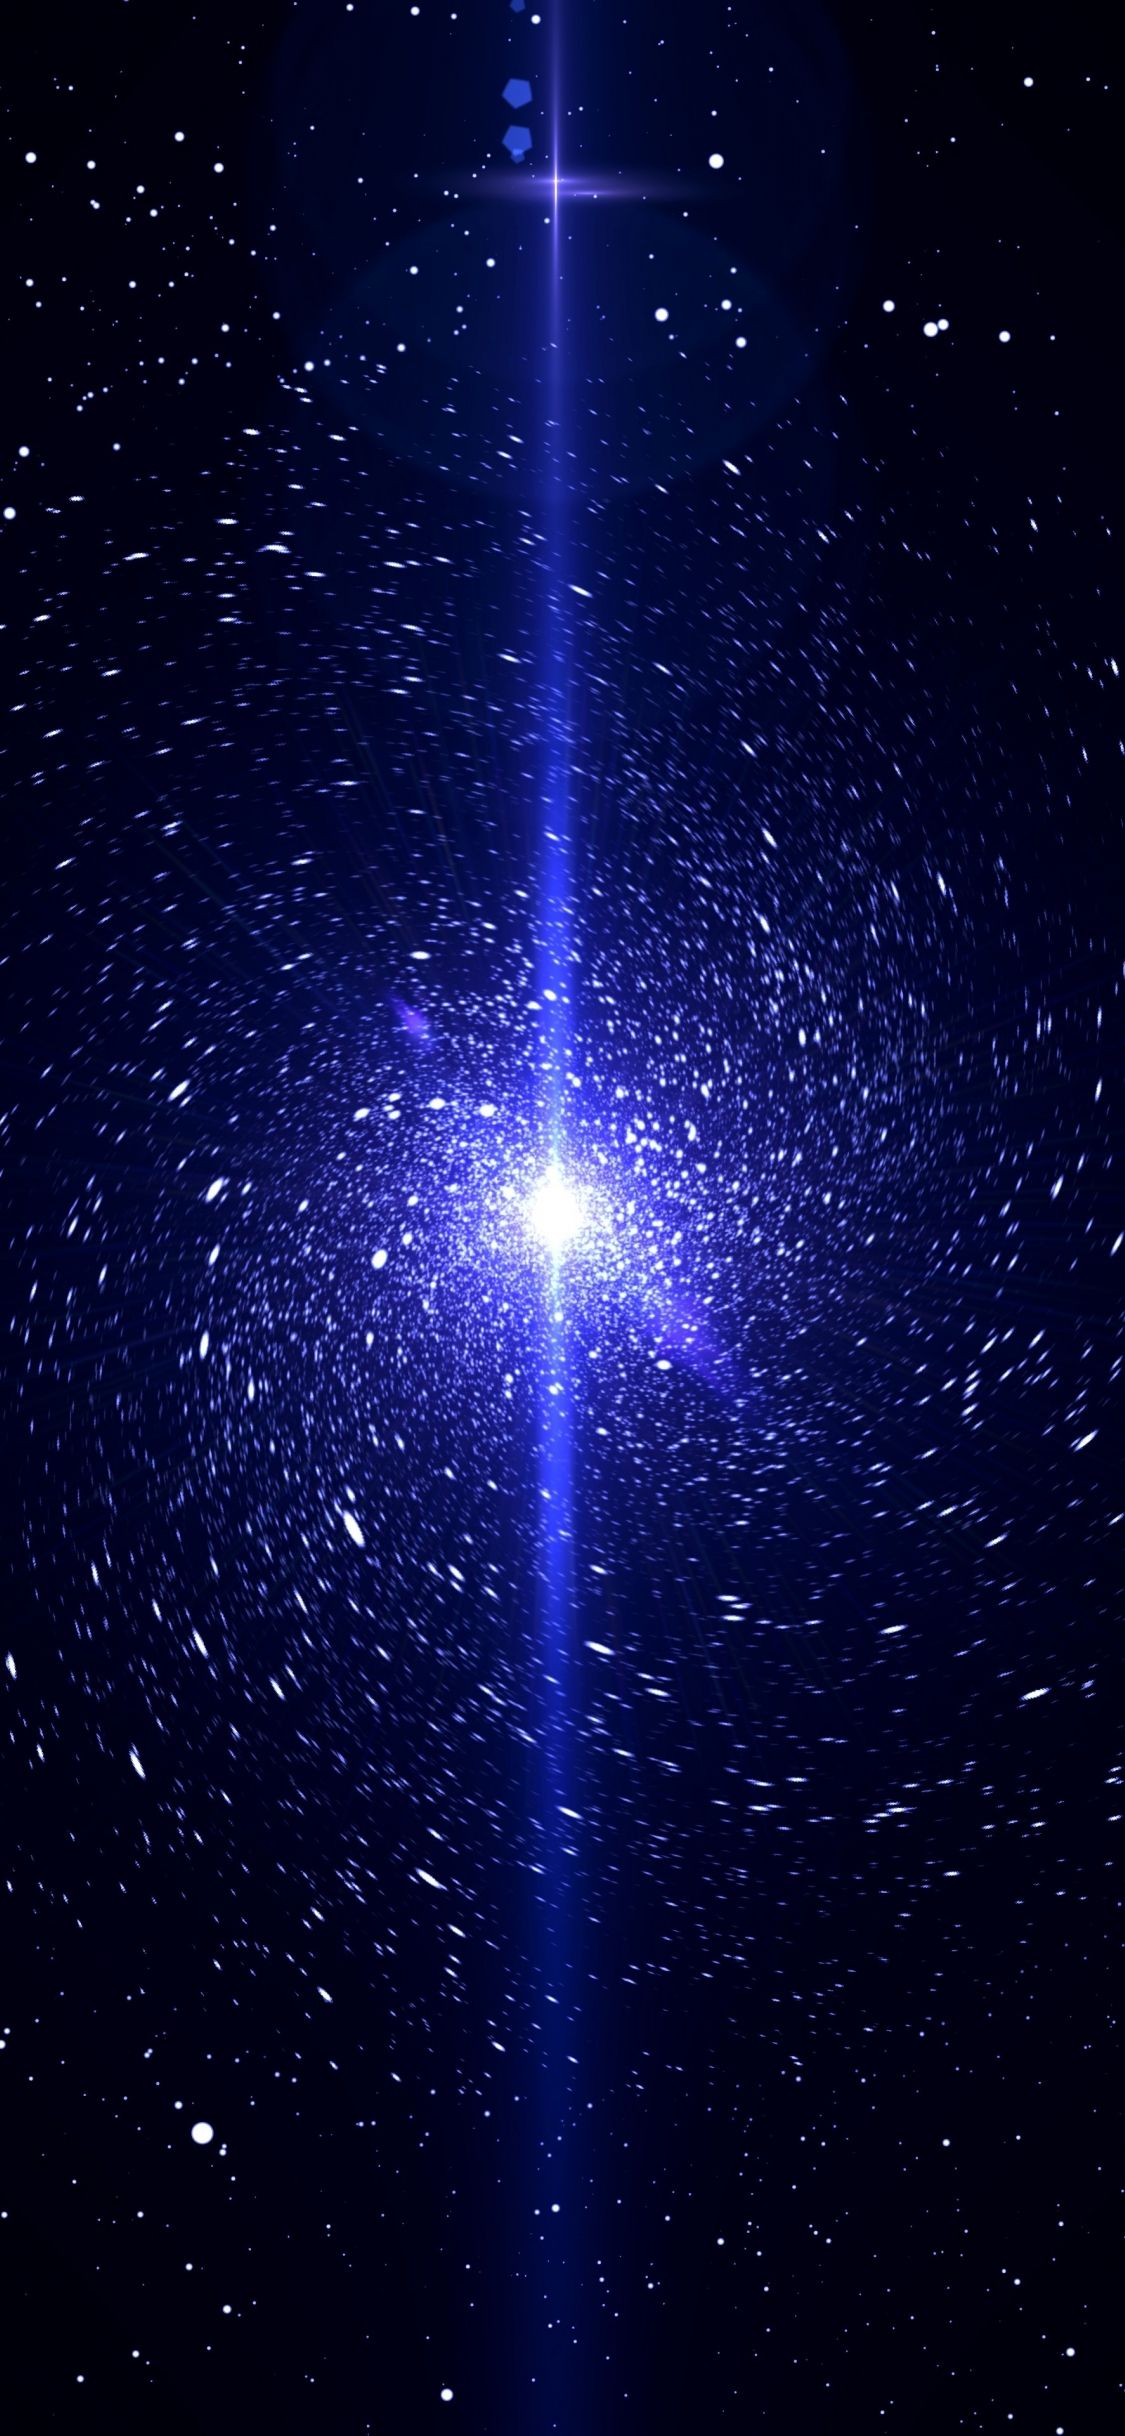 Download 1125x2436 wallpaper blue stars, space, glitter, lines, art, iphone x 1125x2436 HD image, background, 20339